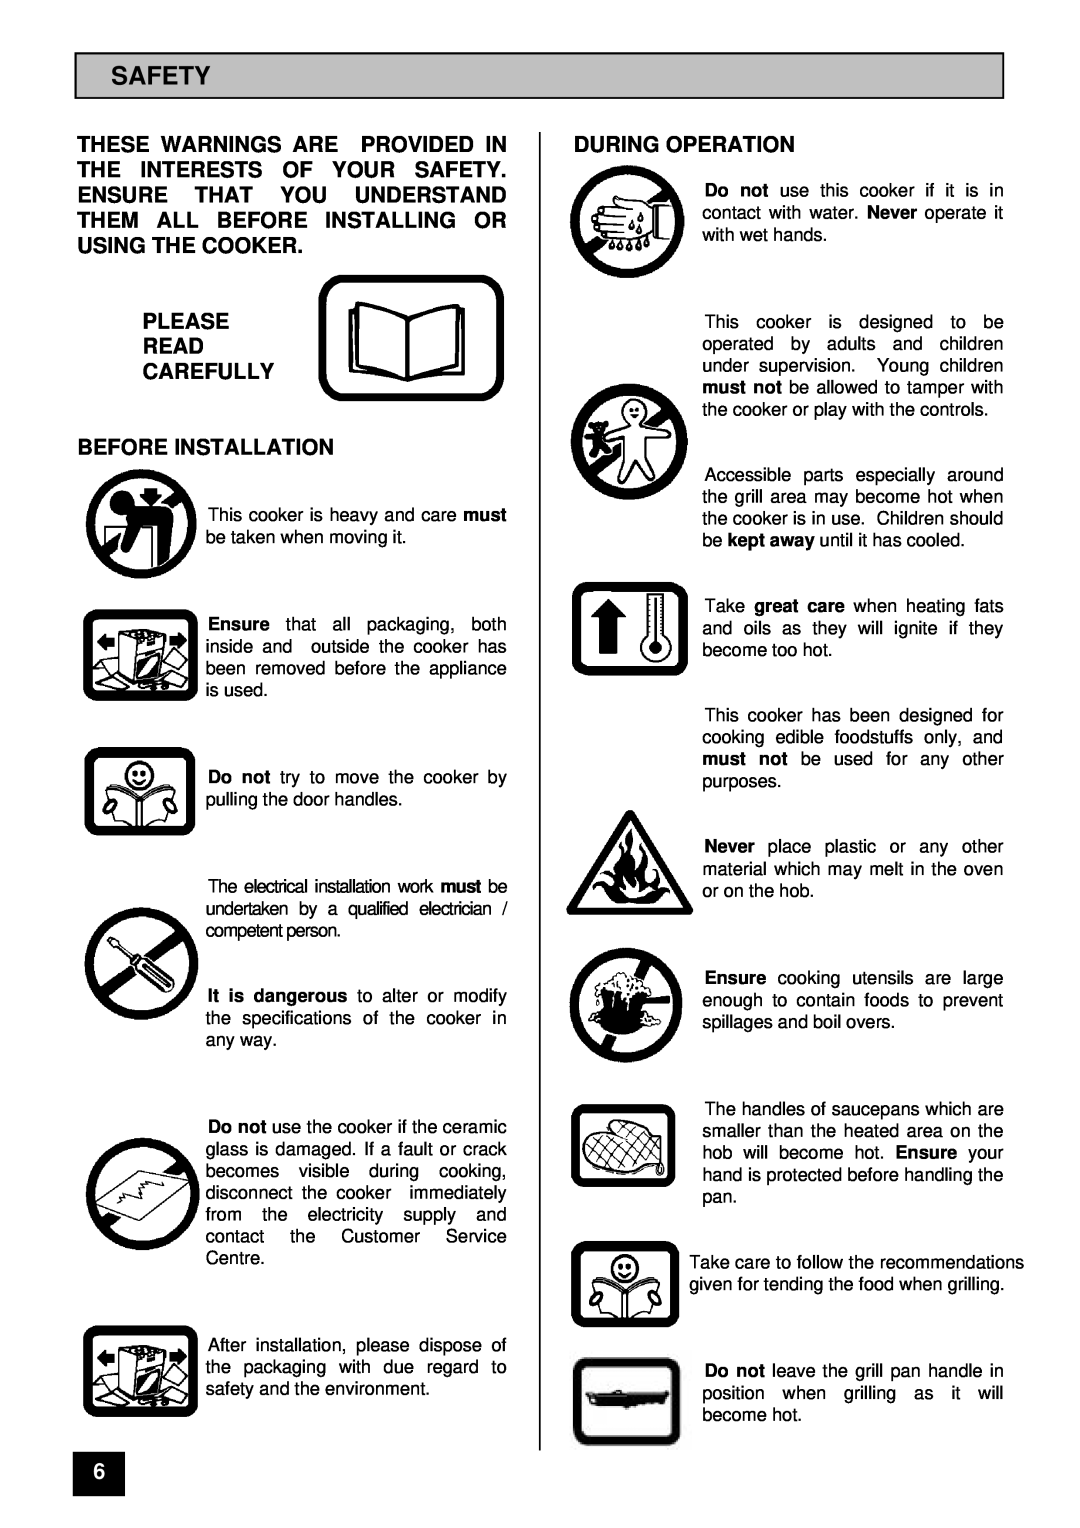 Tricity Bendix CSI 2500 installation instructions Safety, Please Read Carefully Before Installation, During Operation 